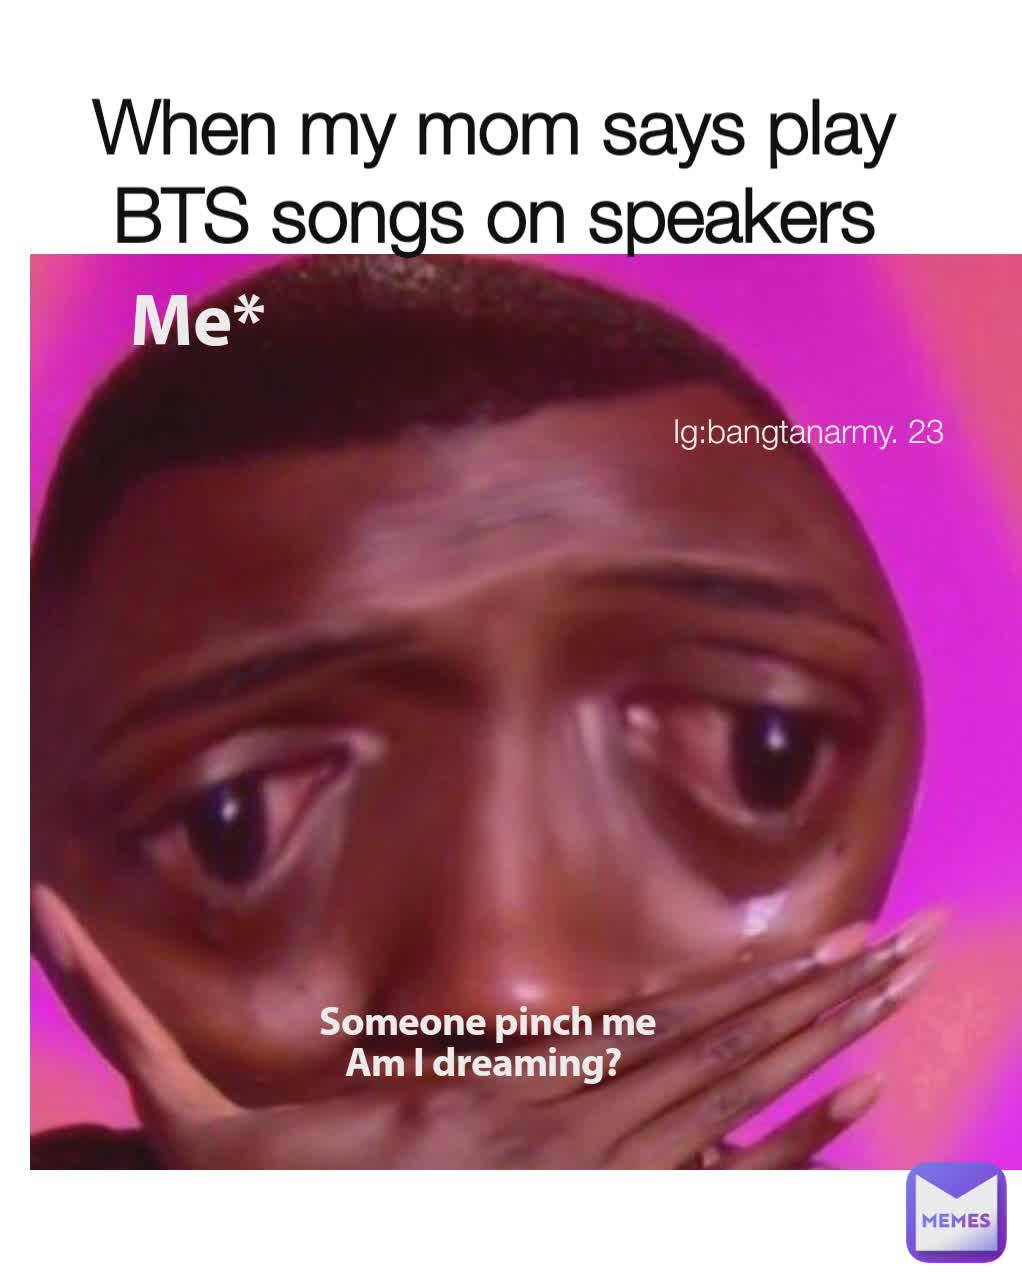 When my mom says play BTS songs on speakers Ig:bangtanarmy. 23 Me* Someone pinch me
Am I dreaming? 